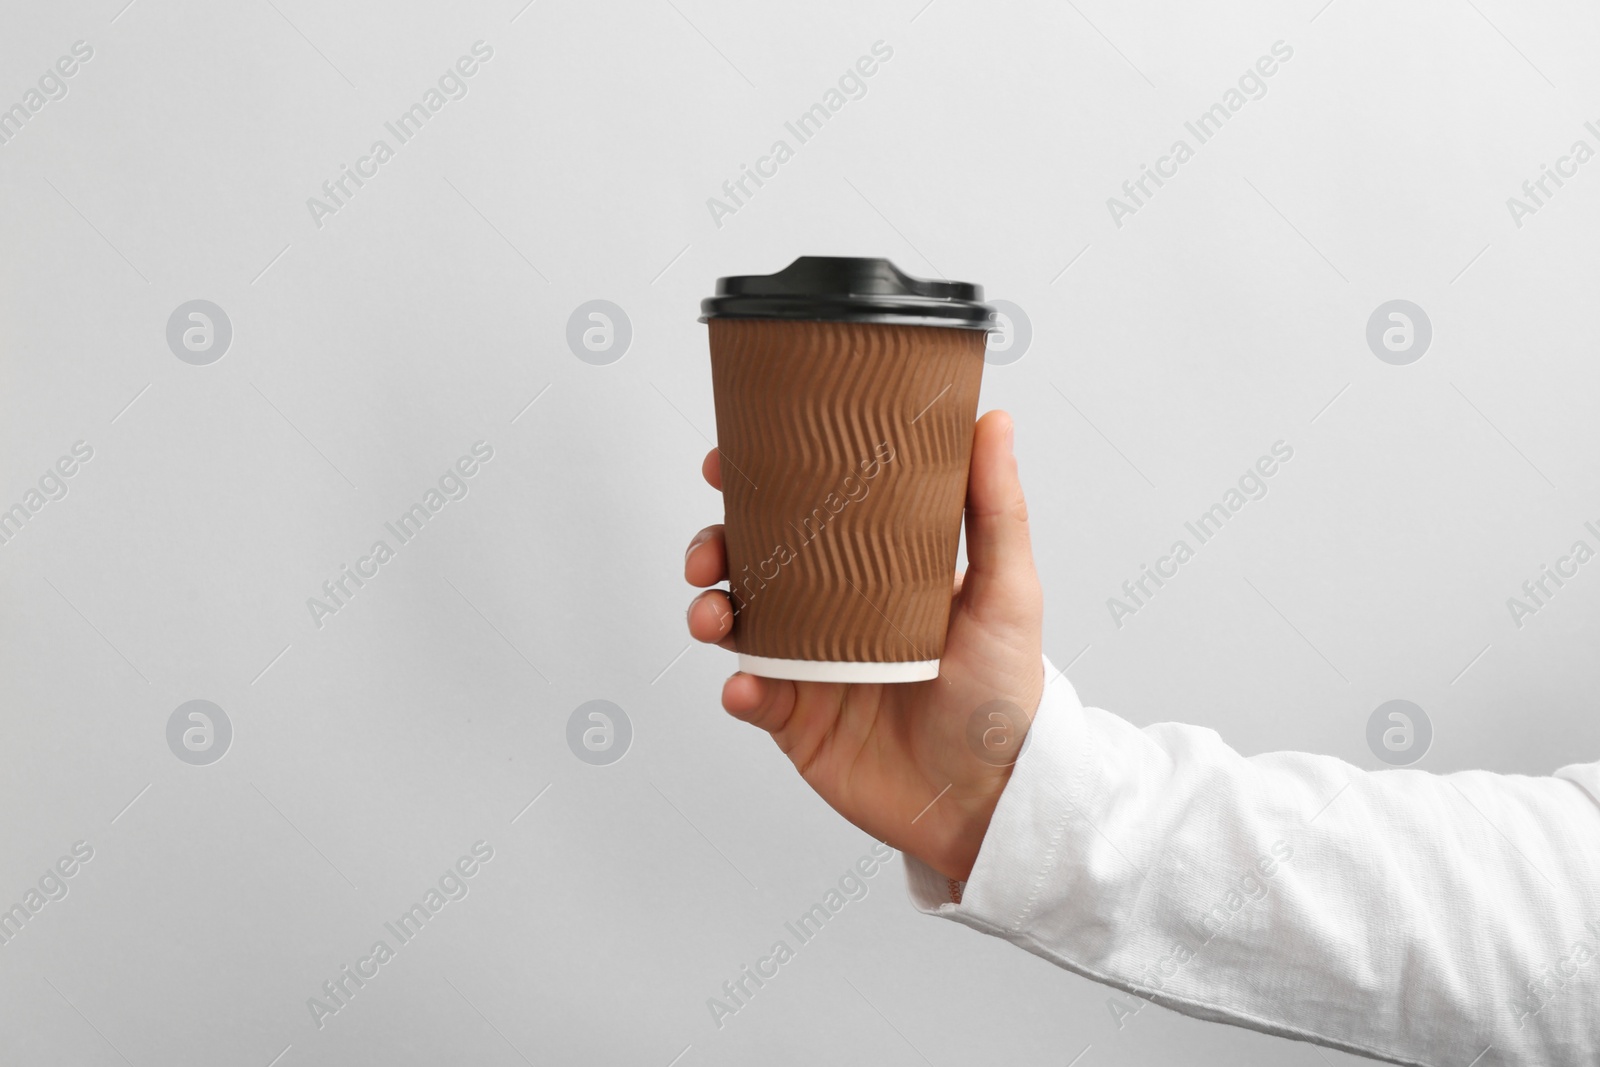 Photo of Man holding takeaway paper coffee cup on light background